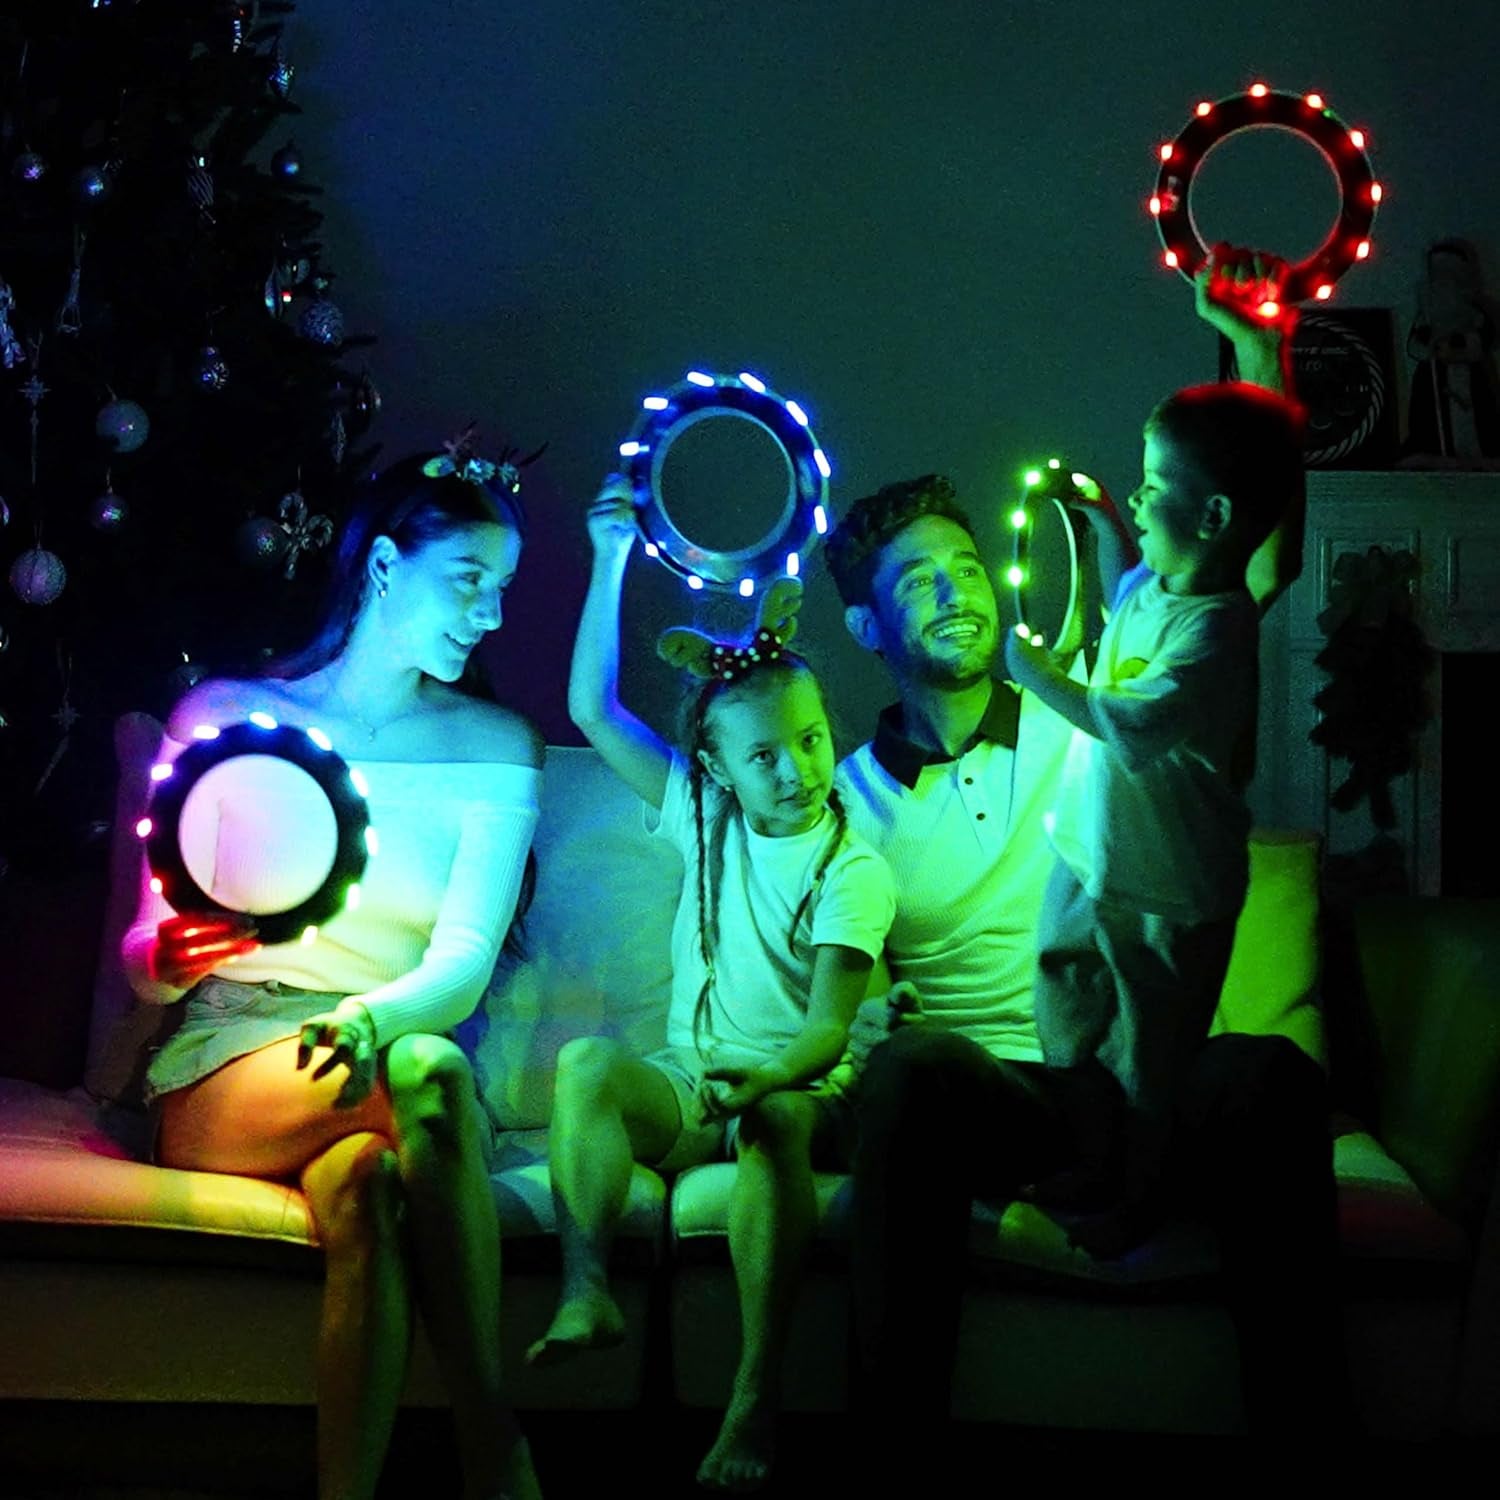 Flying Ring - 12 Leds, Super Bright, Soft, Auto Light Up, Safe, Waterproof, Lightweight Frisbee, Cool Birthday, Camping, Easter Basket Stuffers & Outdoor/Indoor Gift Toy for Boys/Girls/Kids